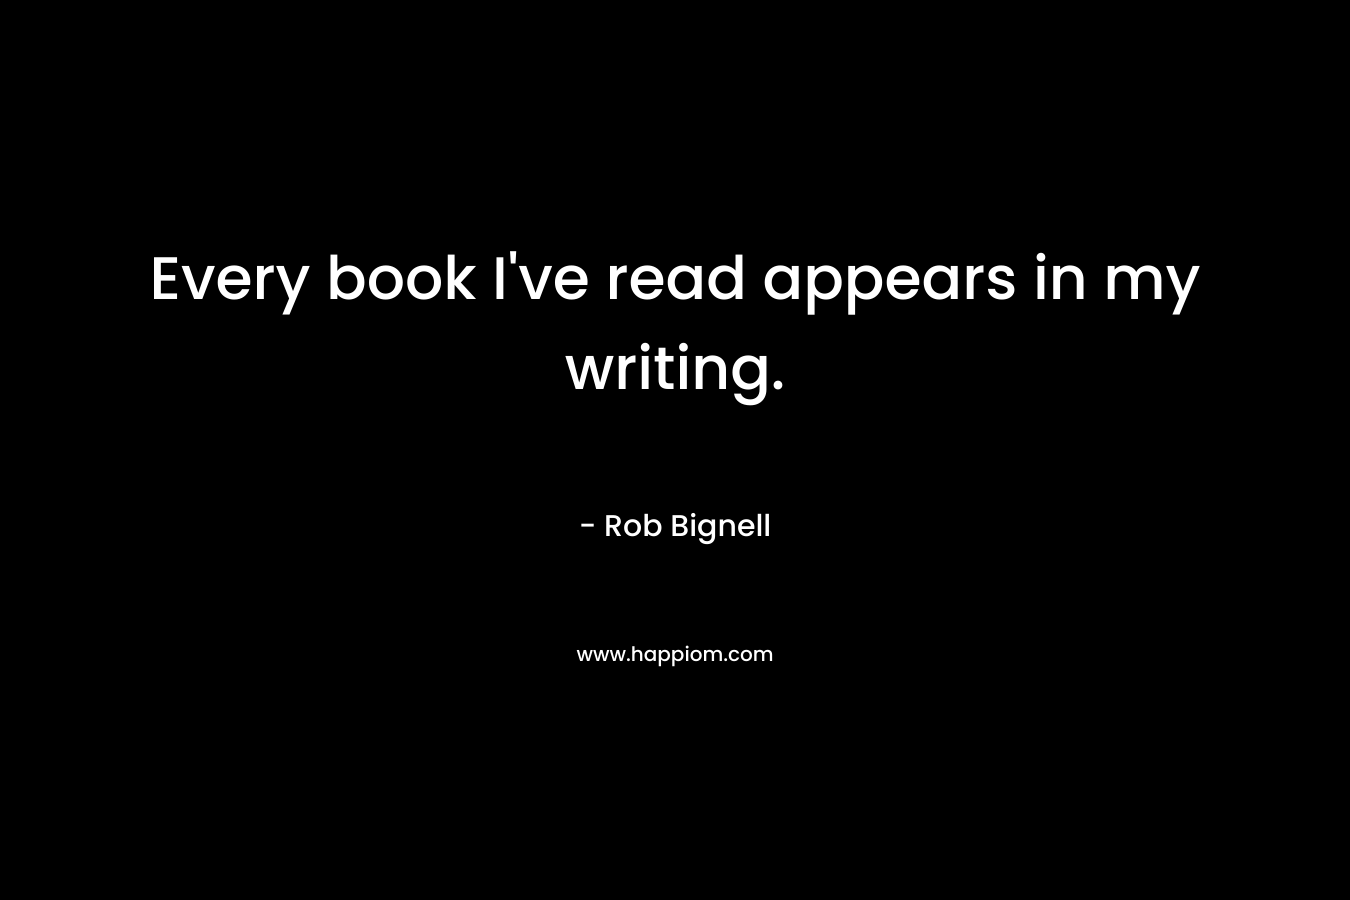 Every book I’ve read appears in my writing. – Rob Bignell